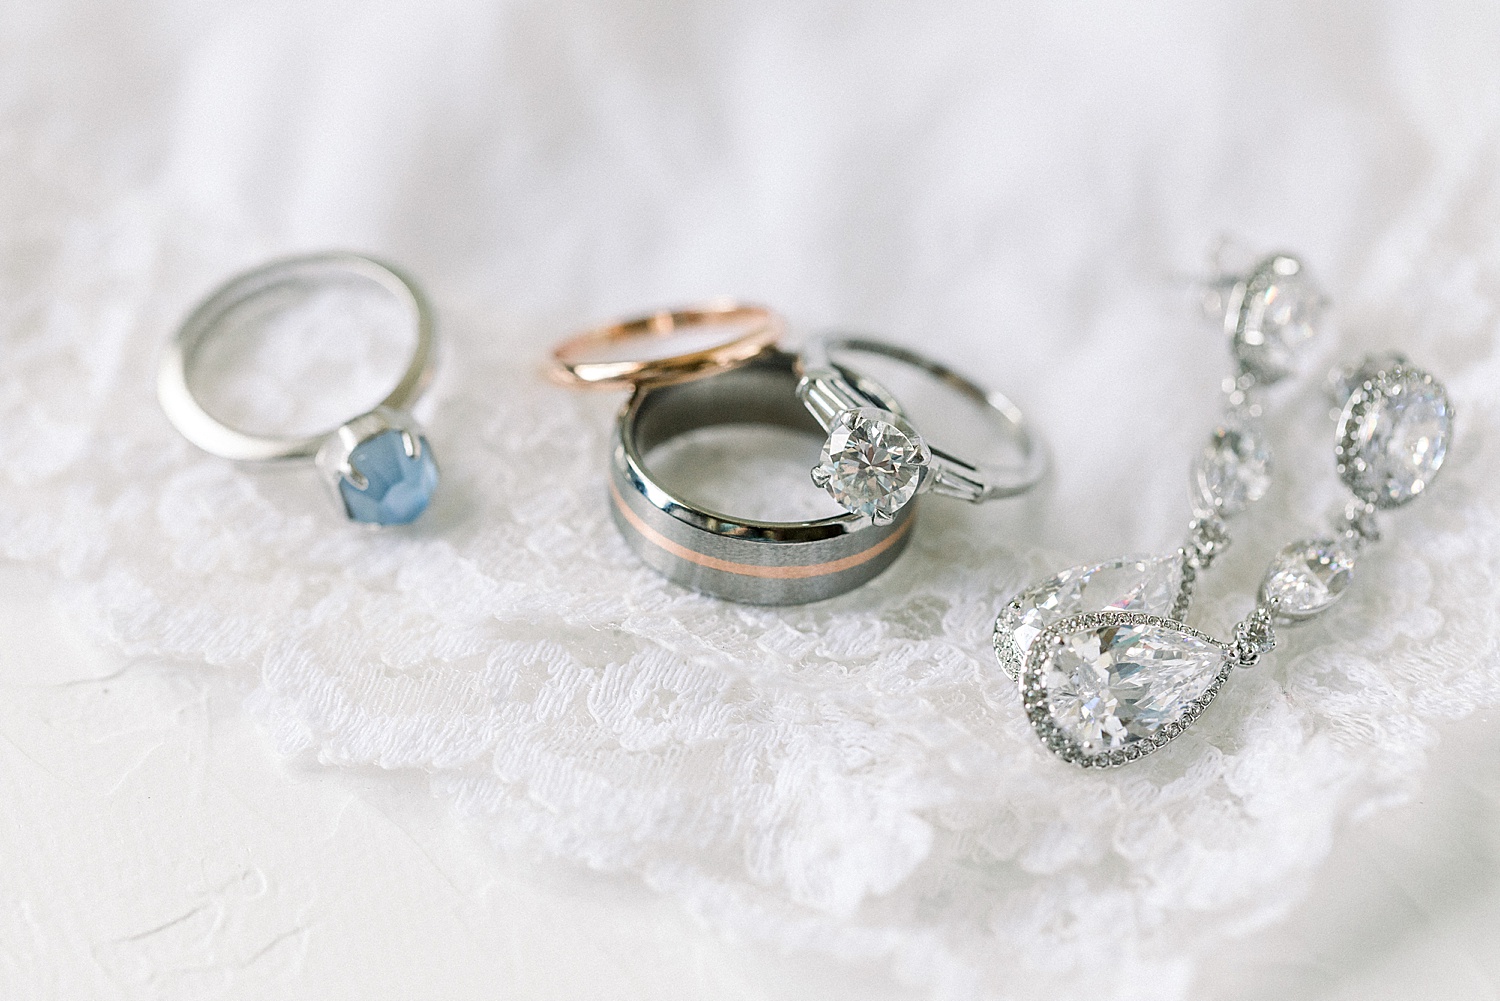 Bride's jewelry from Temple Emanuel Alabama Wedding details